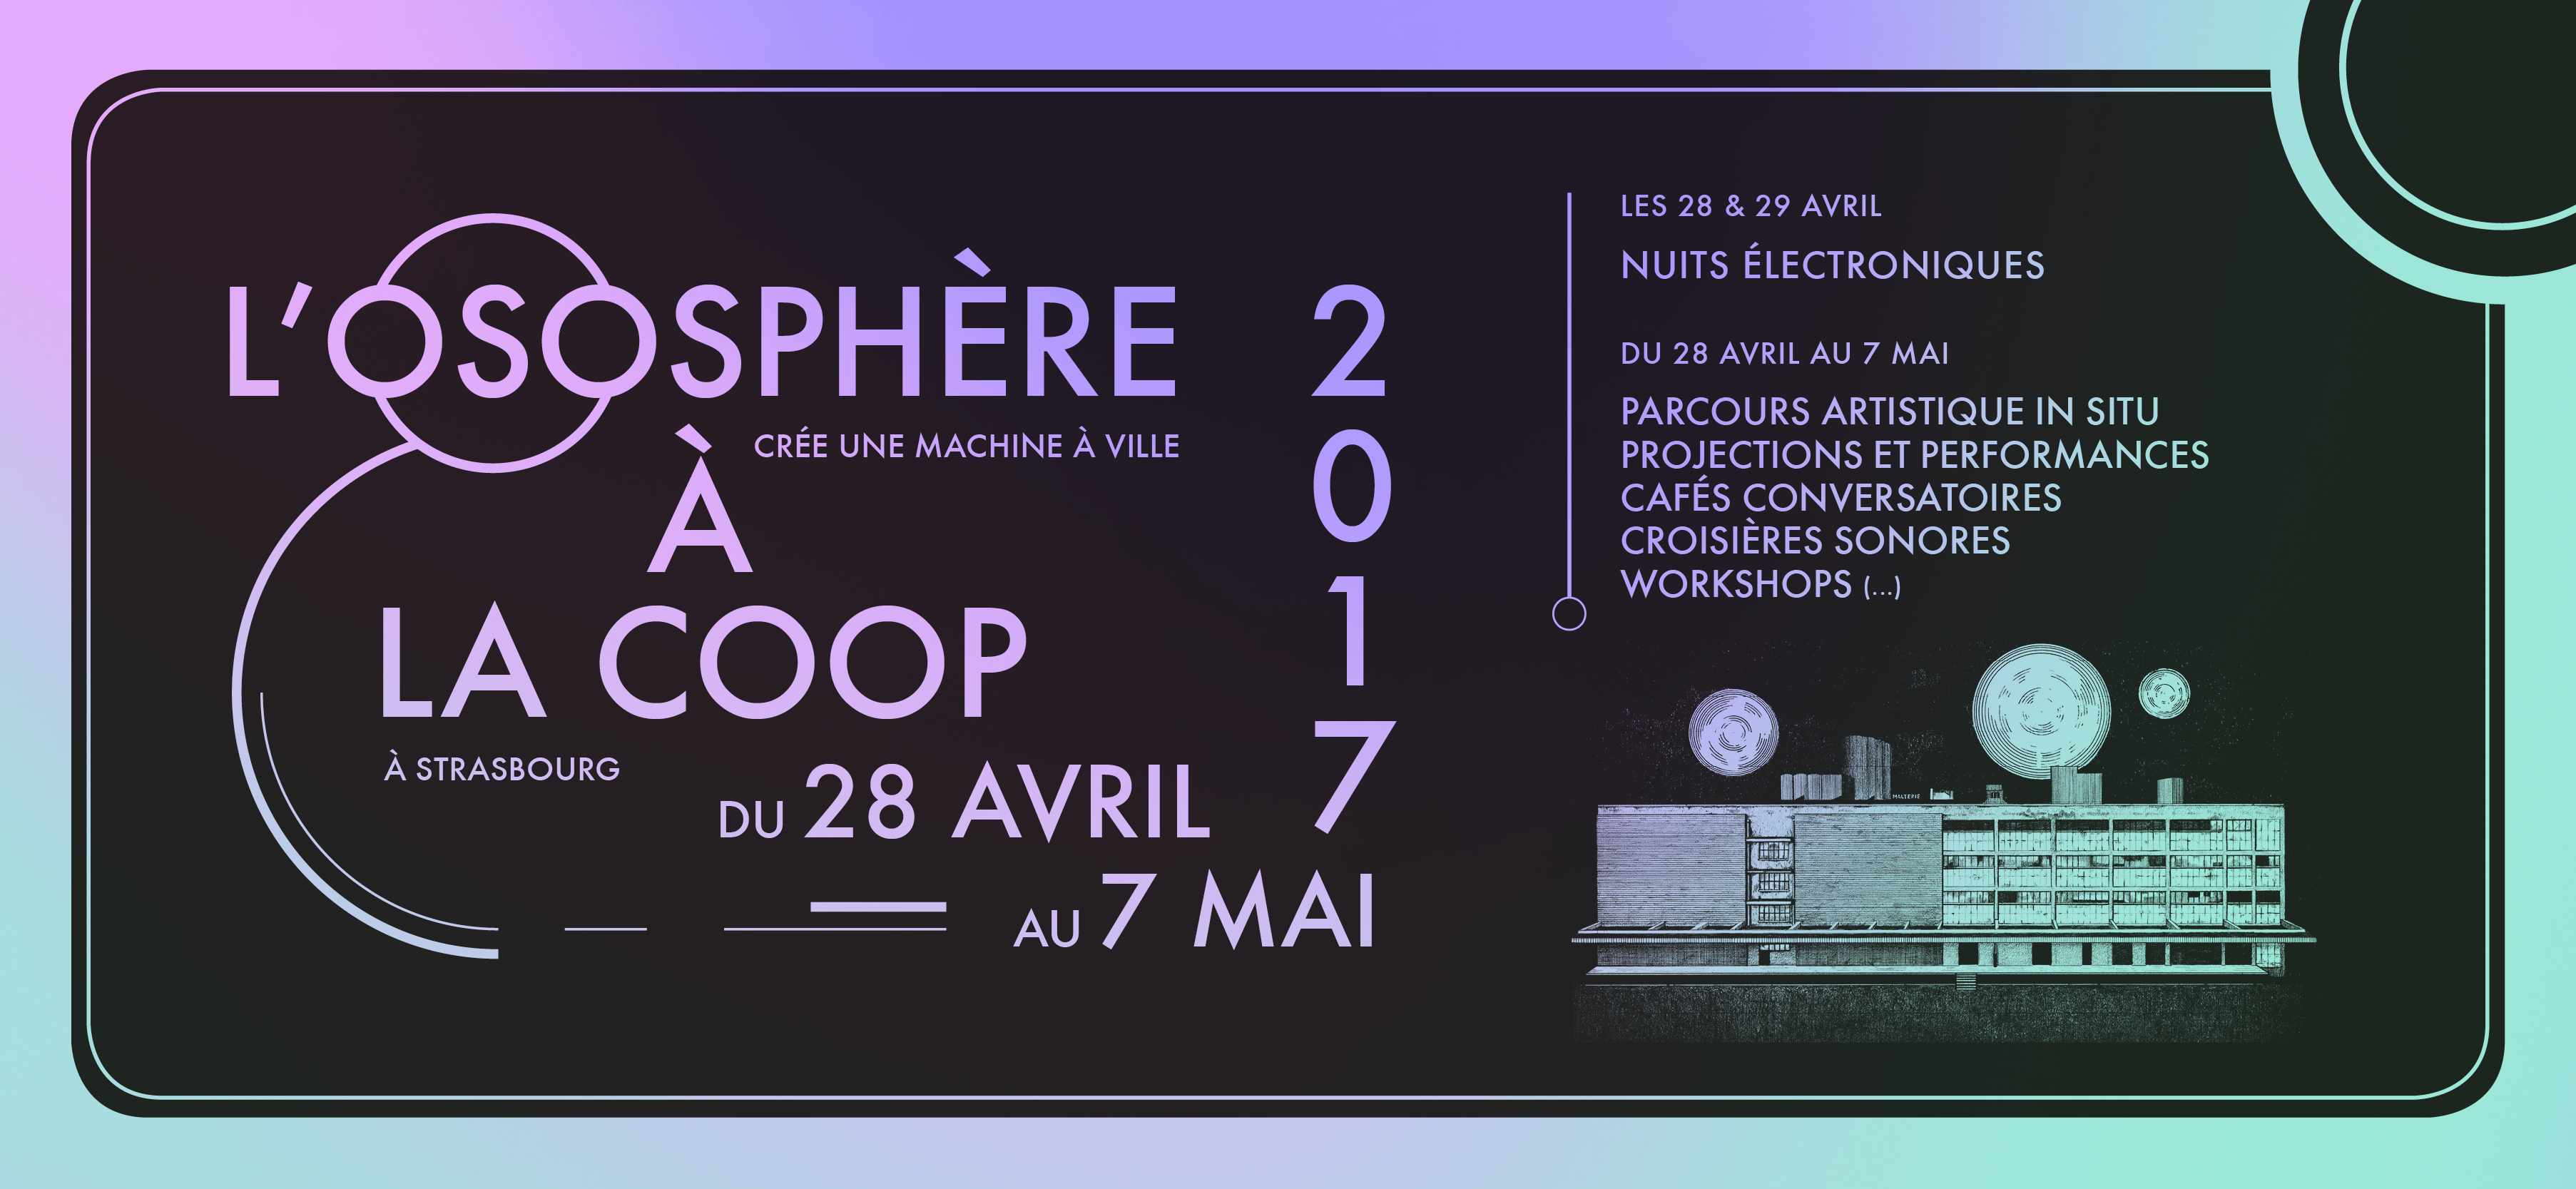 The Osophère festival creates a monumental and immersive artistic itinerary, from April 28th to May 7th, in Strasbourg